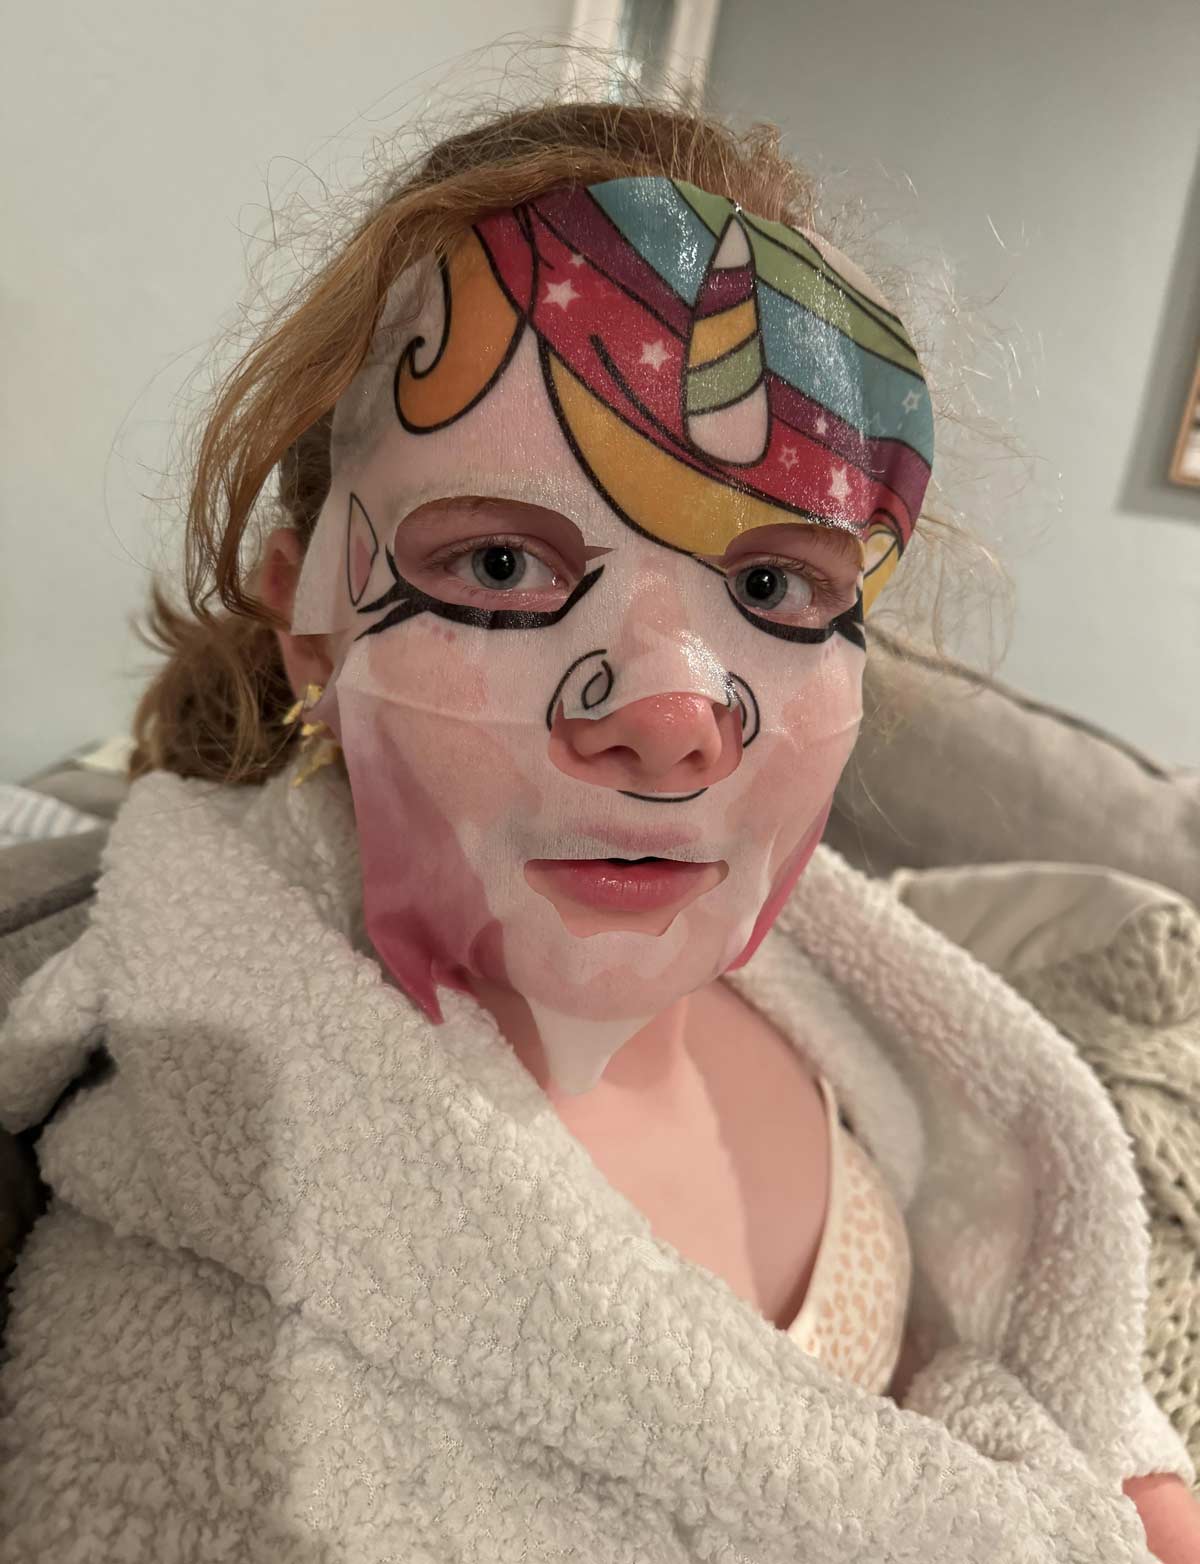 My daughter looks like Hannibal Lecter wearing someone’s face. It’s a unicorn face mask